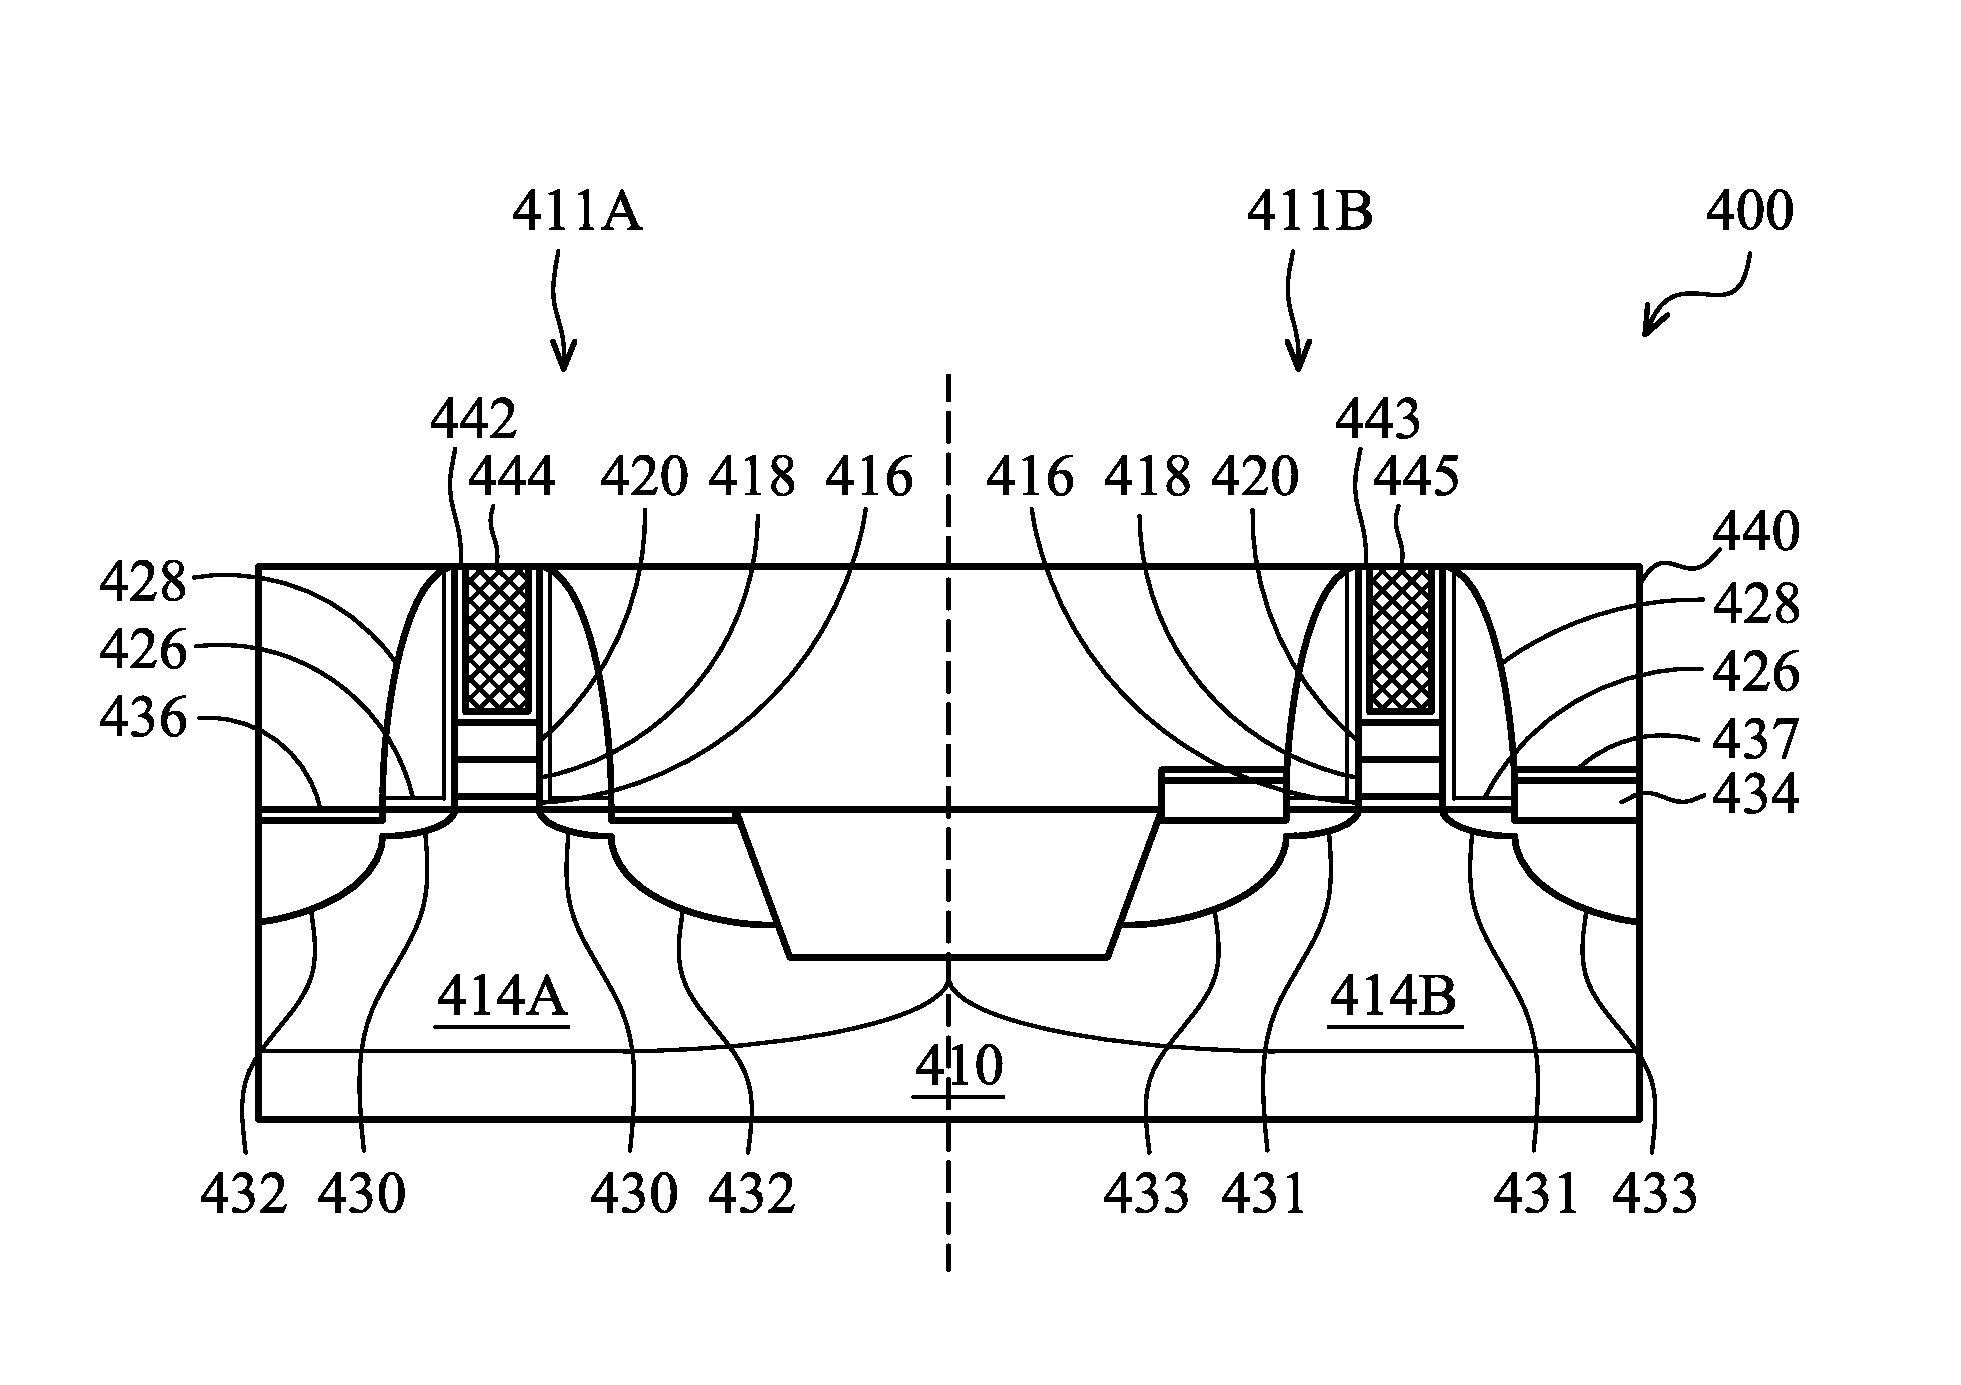 Methods for a gate replacement process